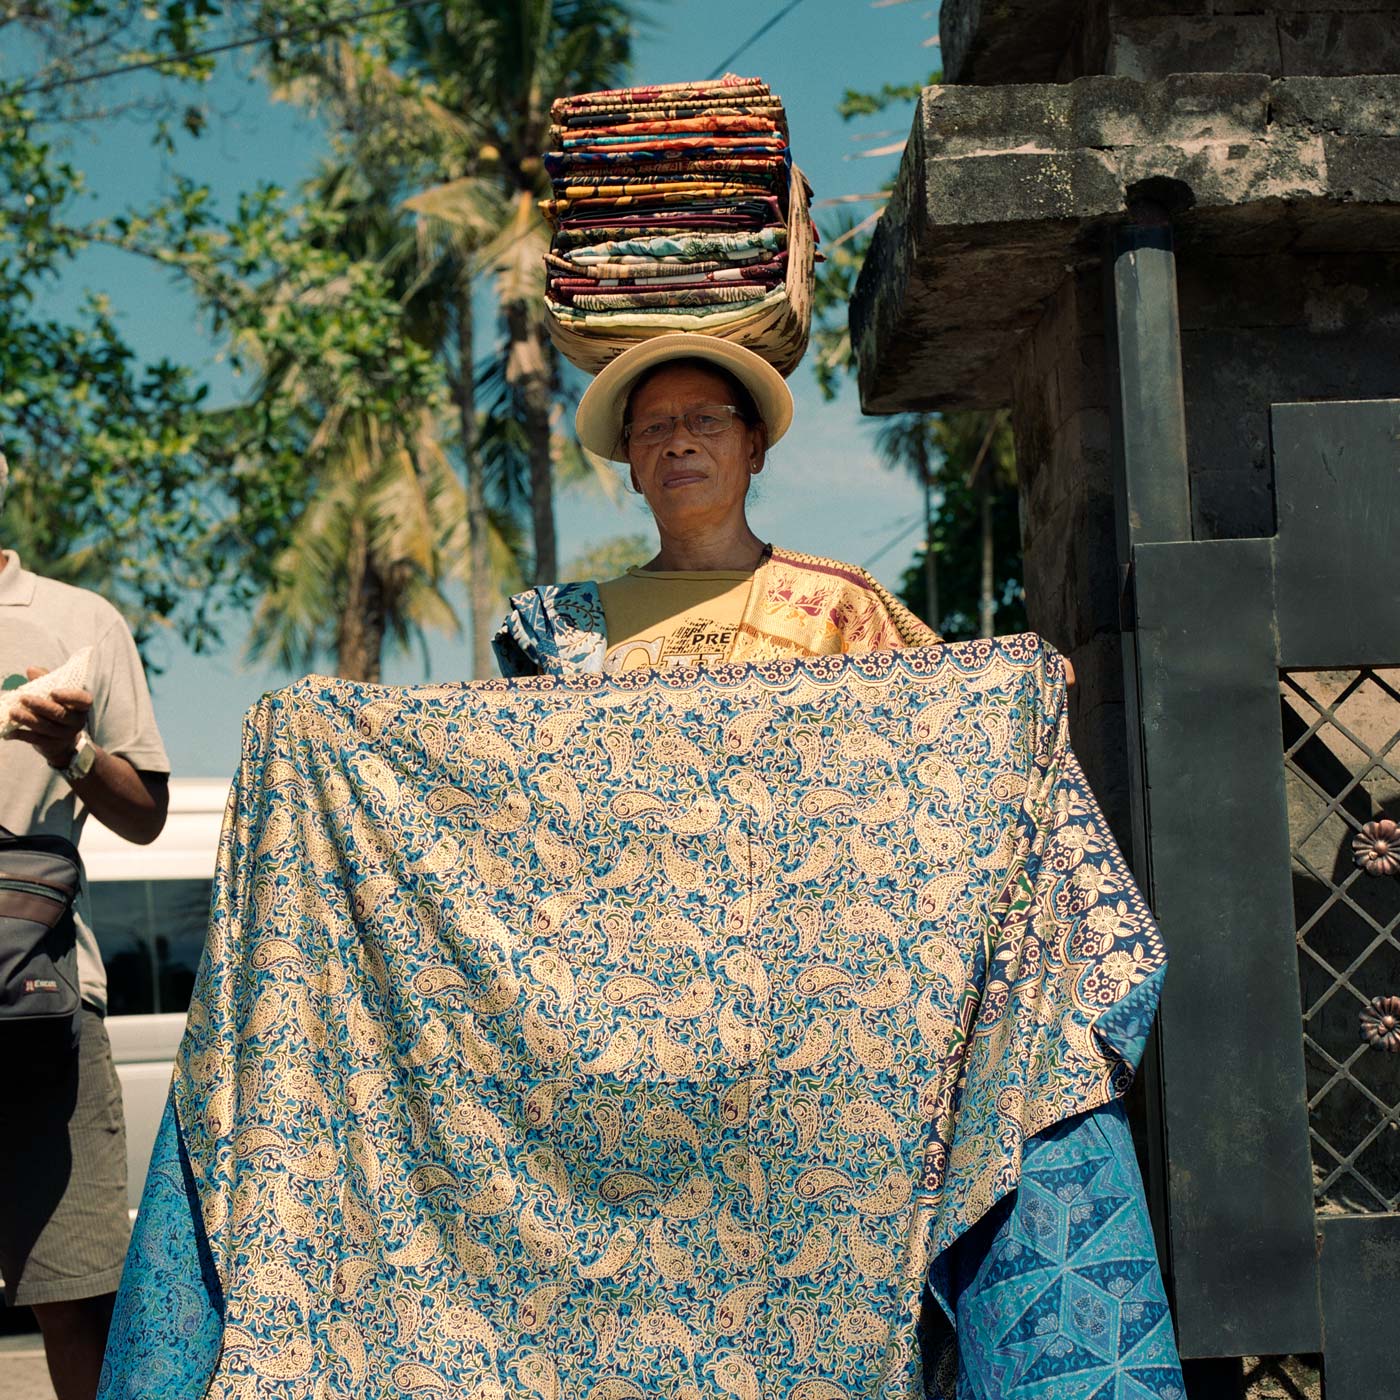 Female street trader selling Batik fabric wraps, with a pile of fabrics on her head.